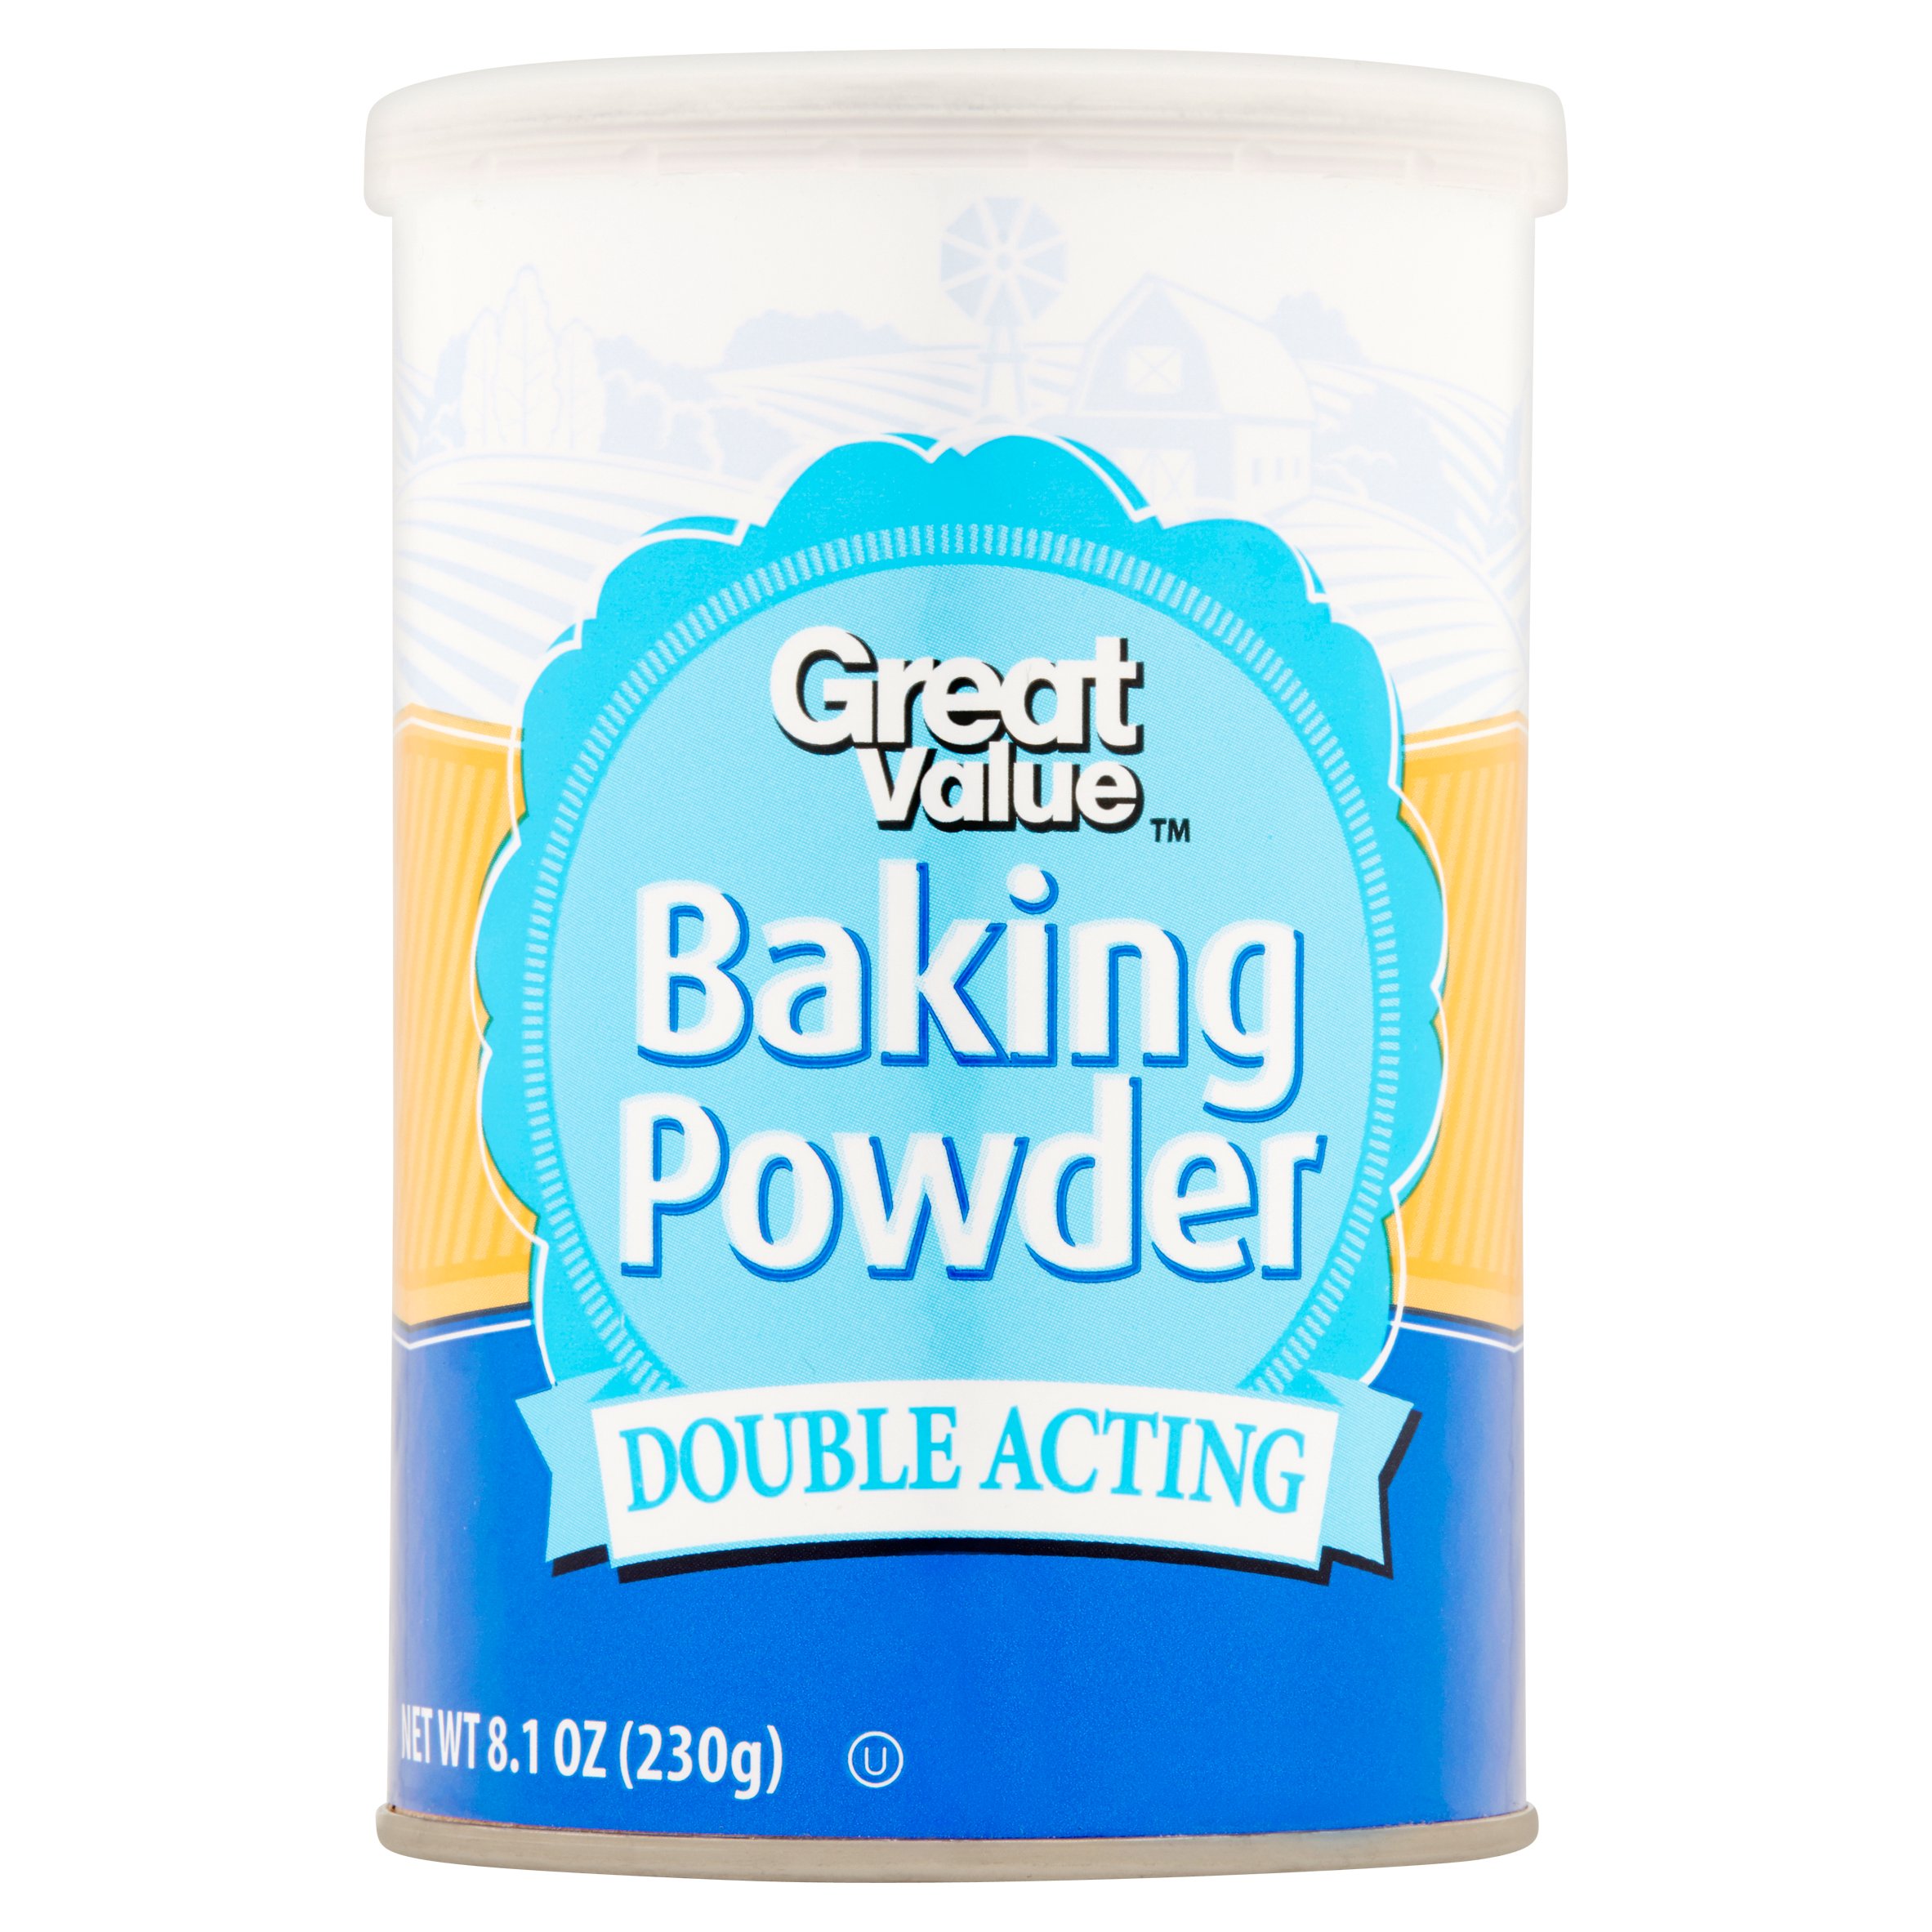 (5 Pack) Great Value Double Acting Baking Powder 8.1 Oz